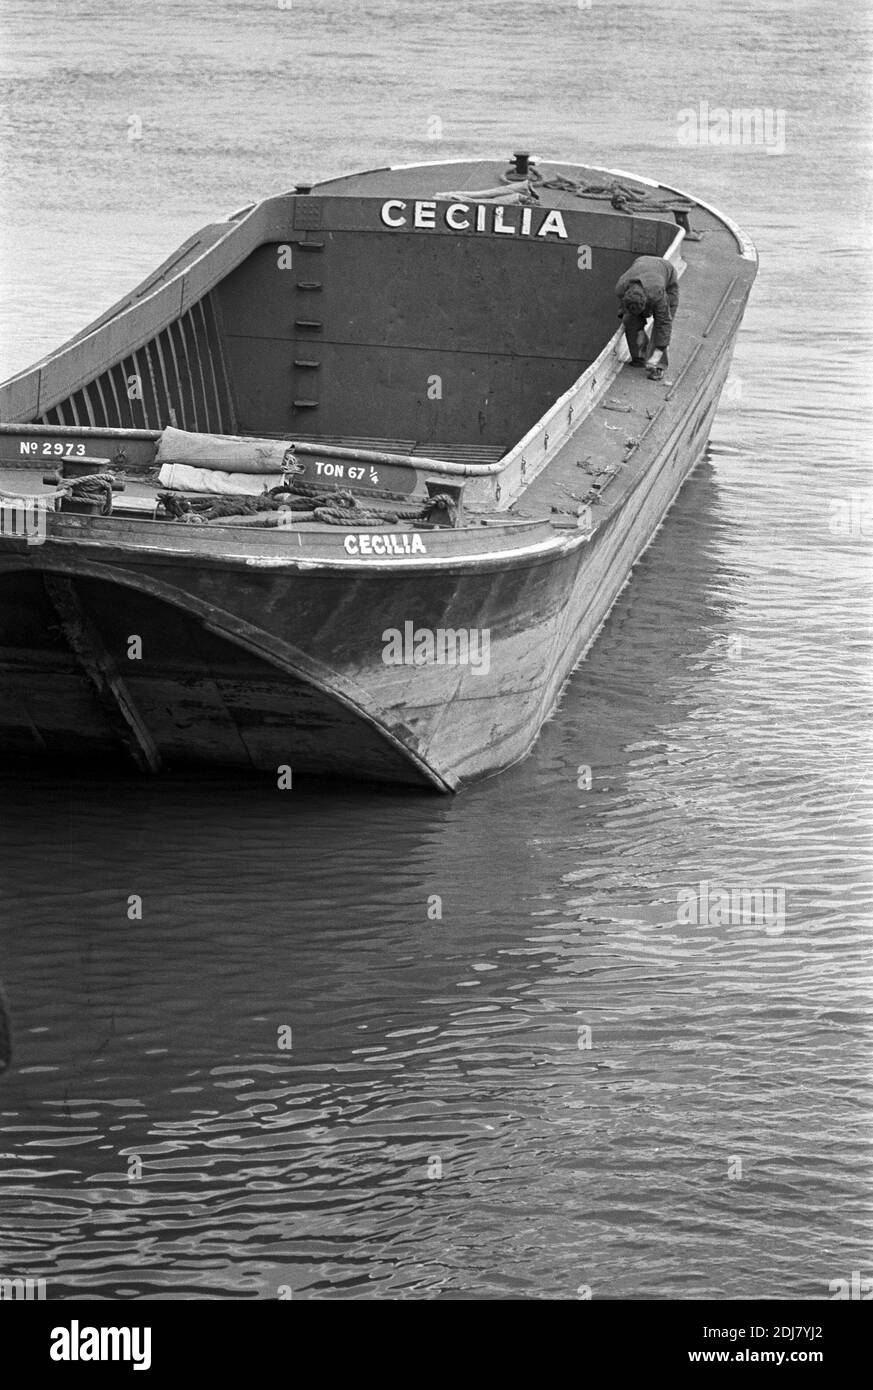 UK, London, Docklands, Isle of Dogs, River Thames, early 1974.'Cecilia' River Thames lighter or cargo, enginless, barge. Steel hull riveted sections. Stock Photo